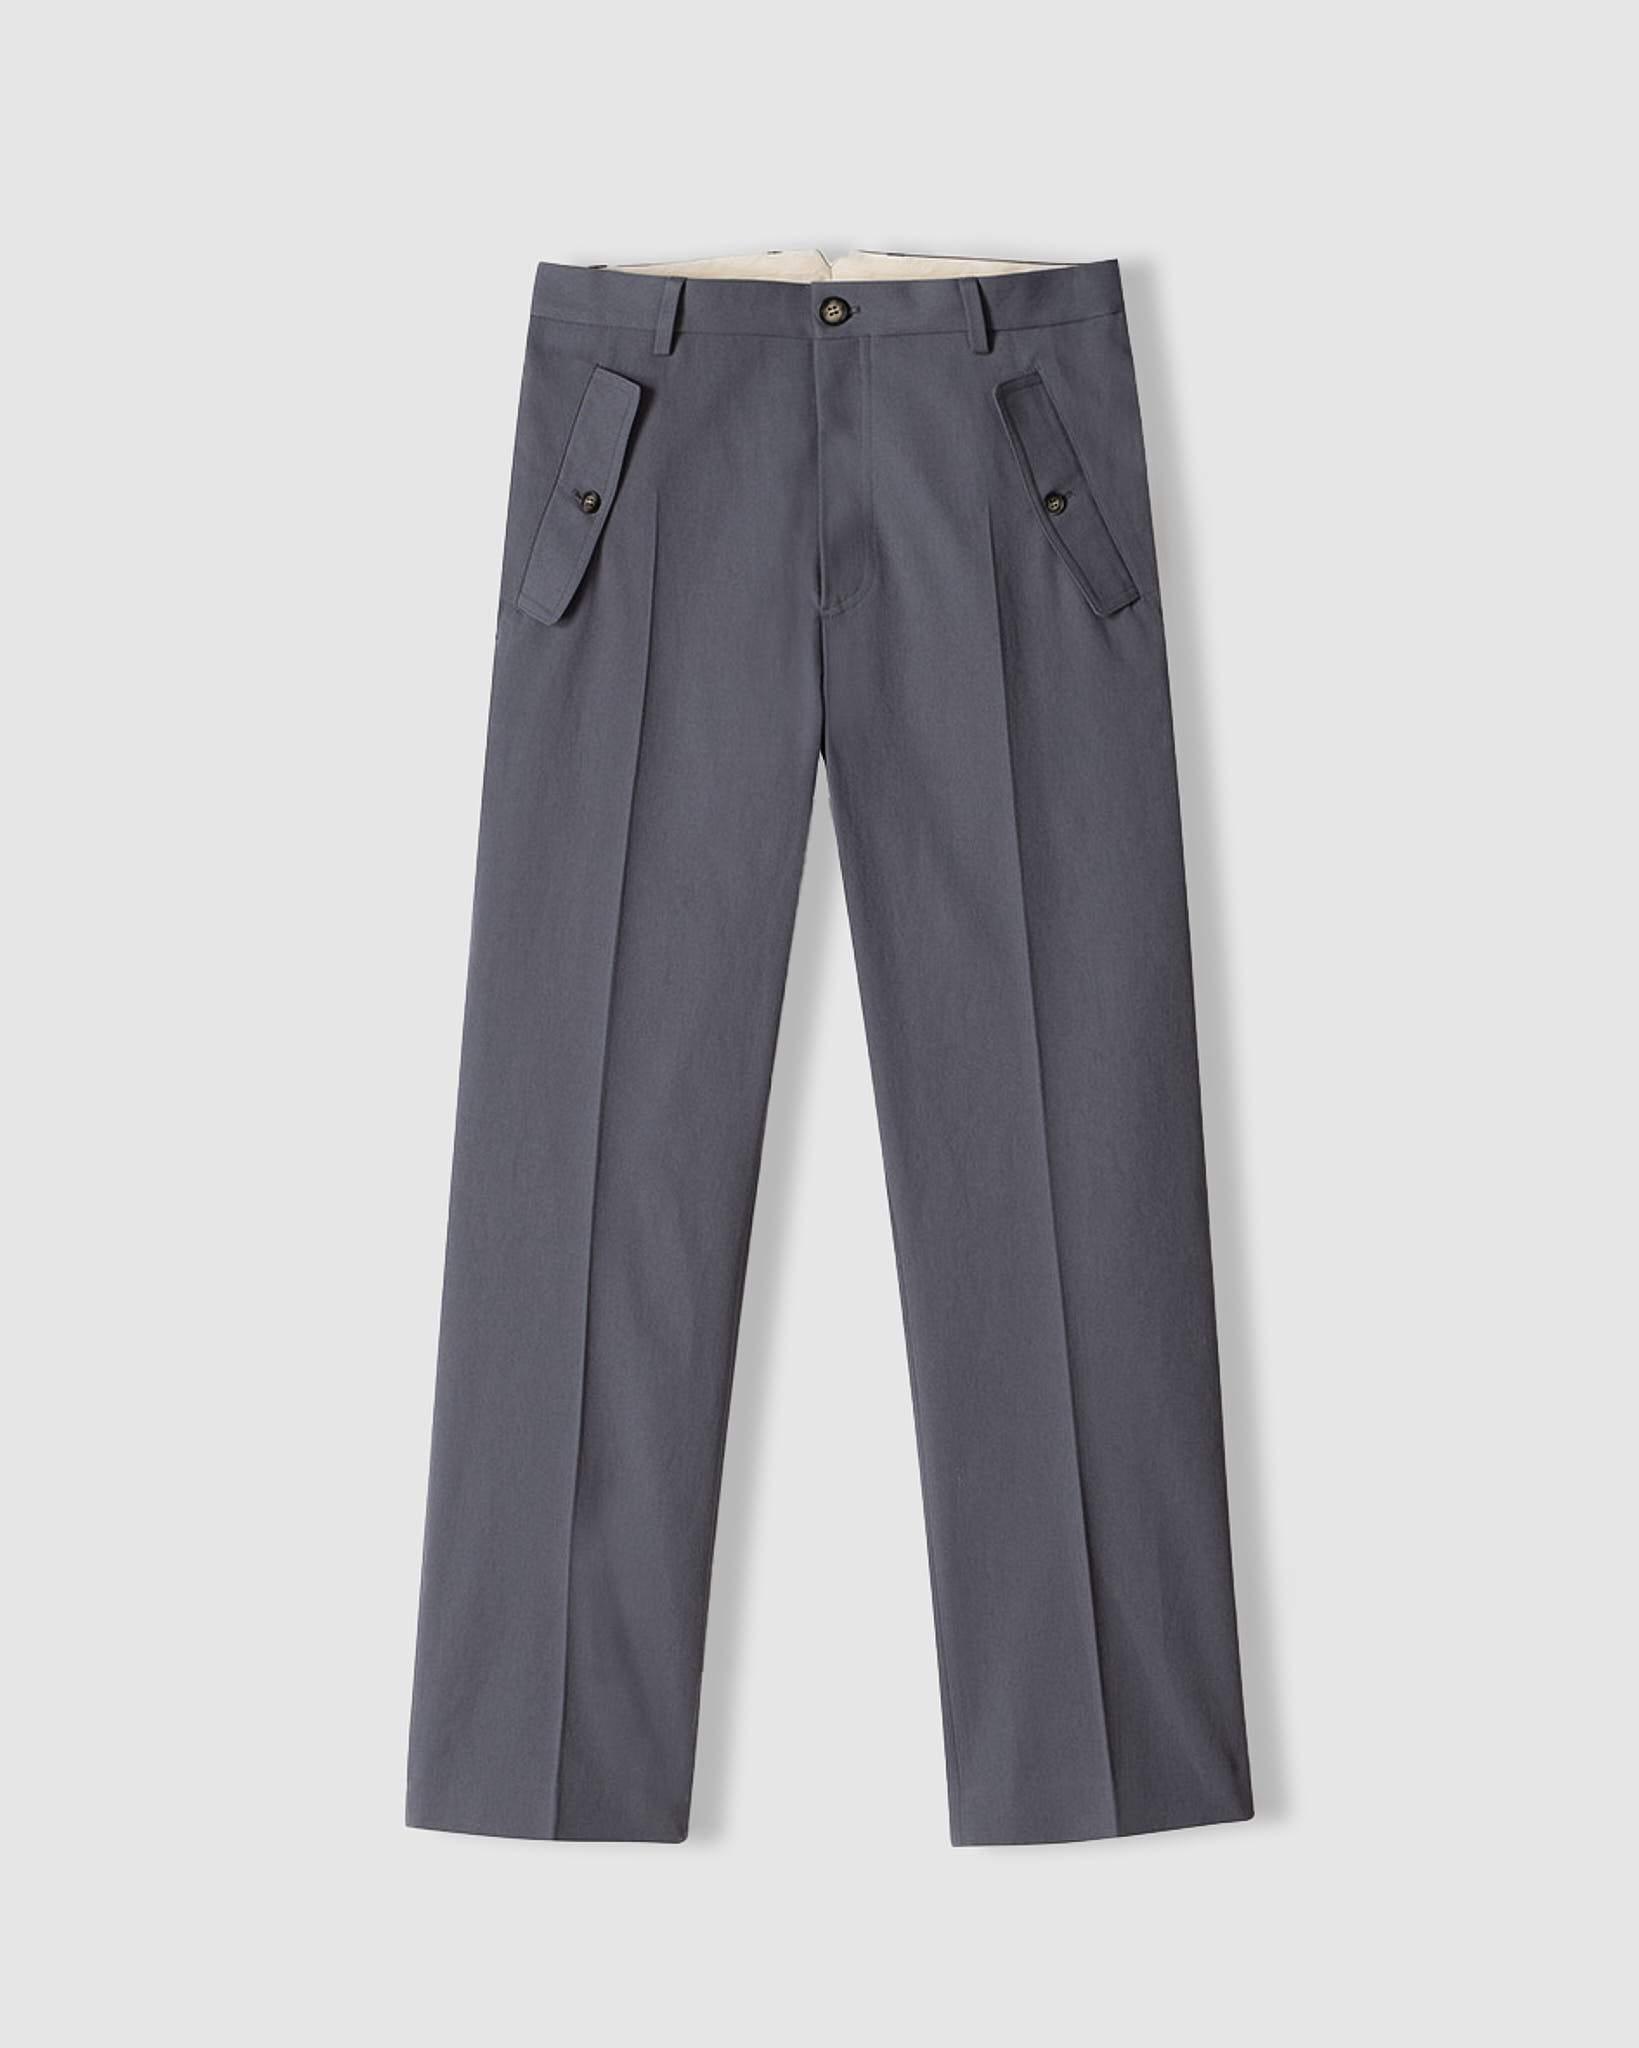 Veron Twill Pants - {{ collection.title }} - Chinatown Country Club 